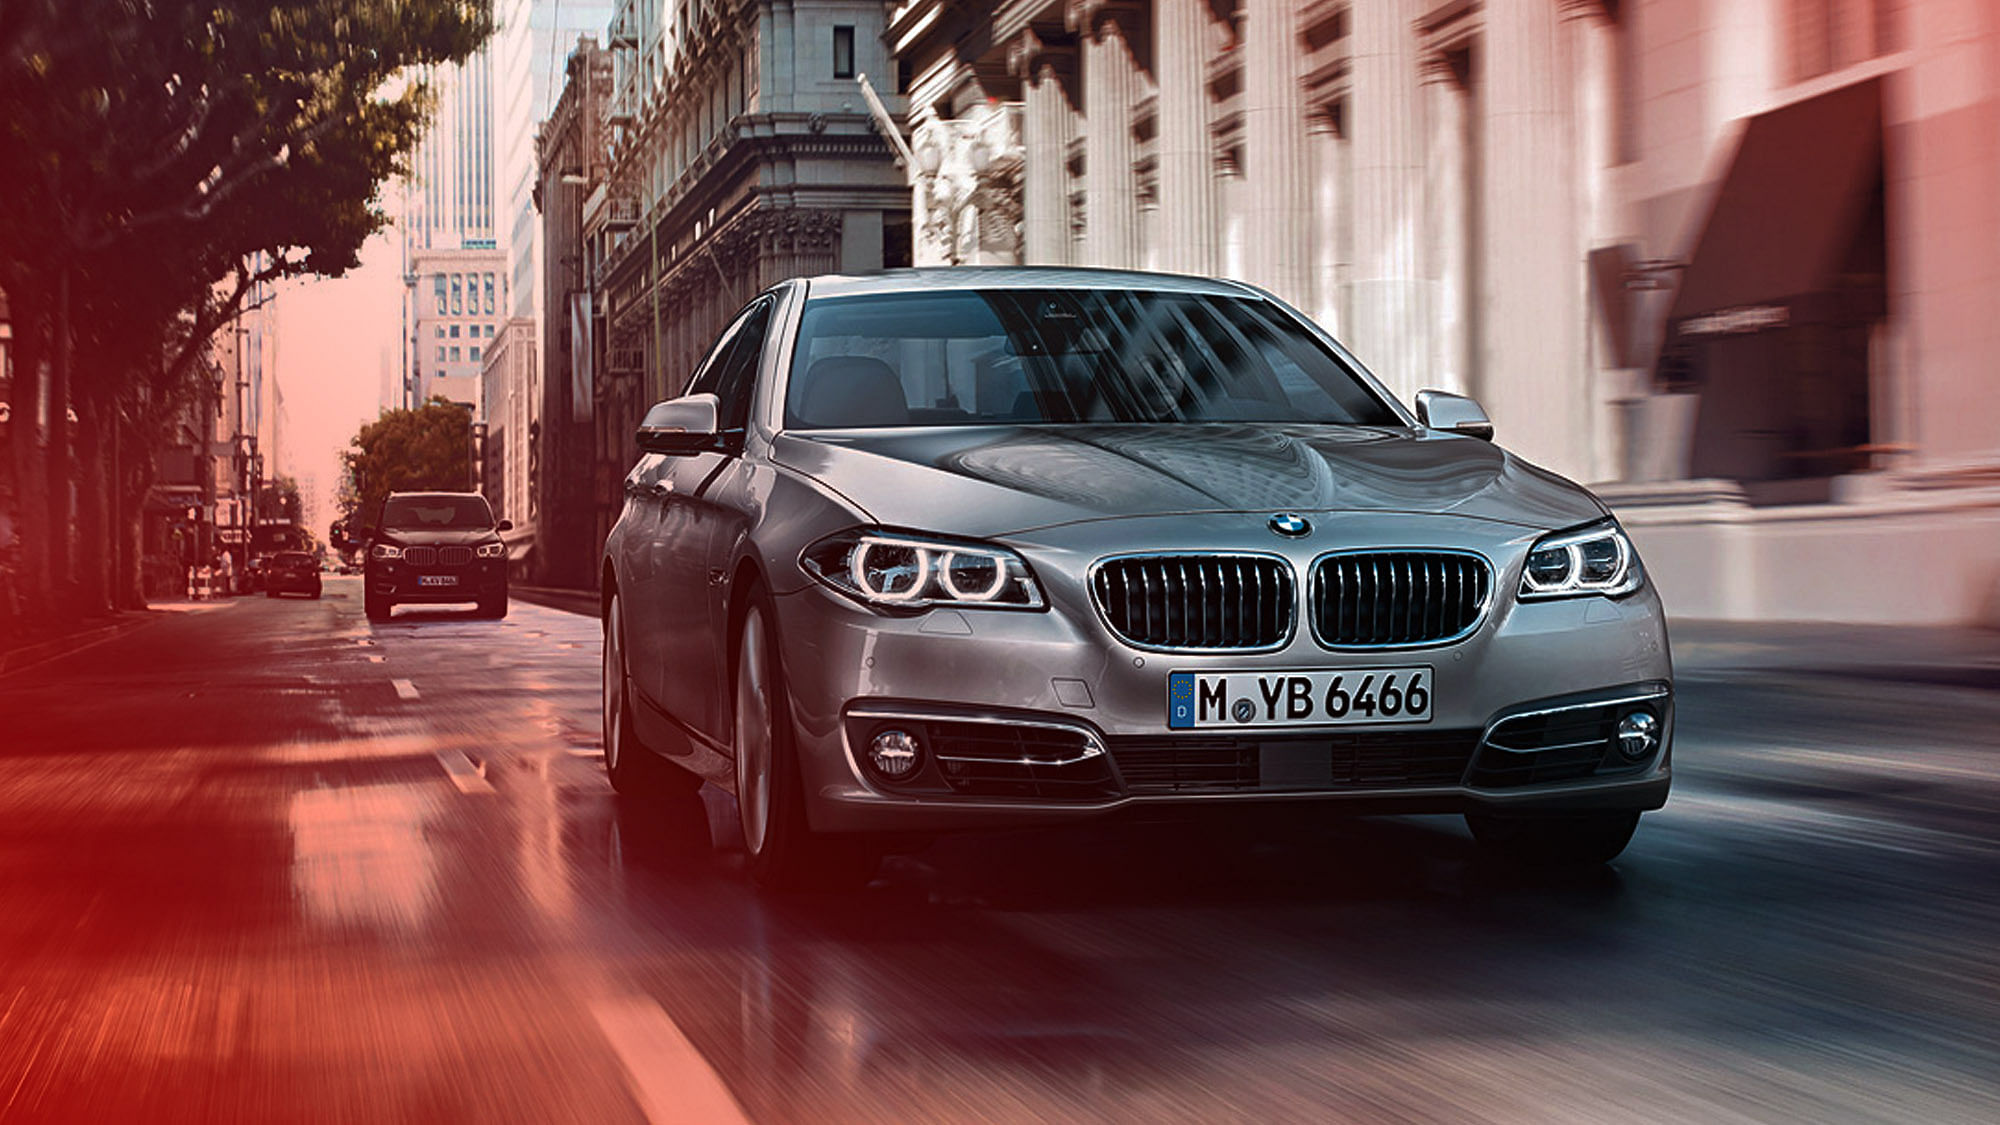 

BMW is all set to dominate the luxury auto space this year.